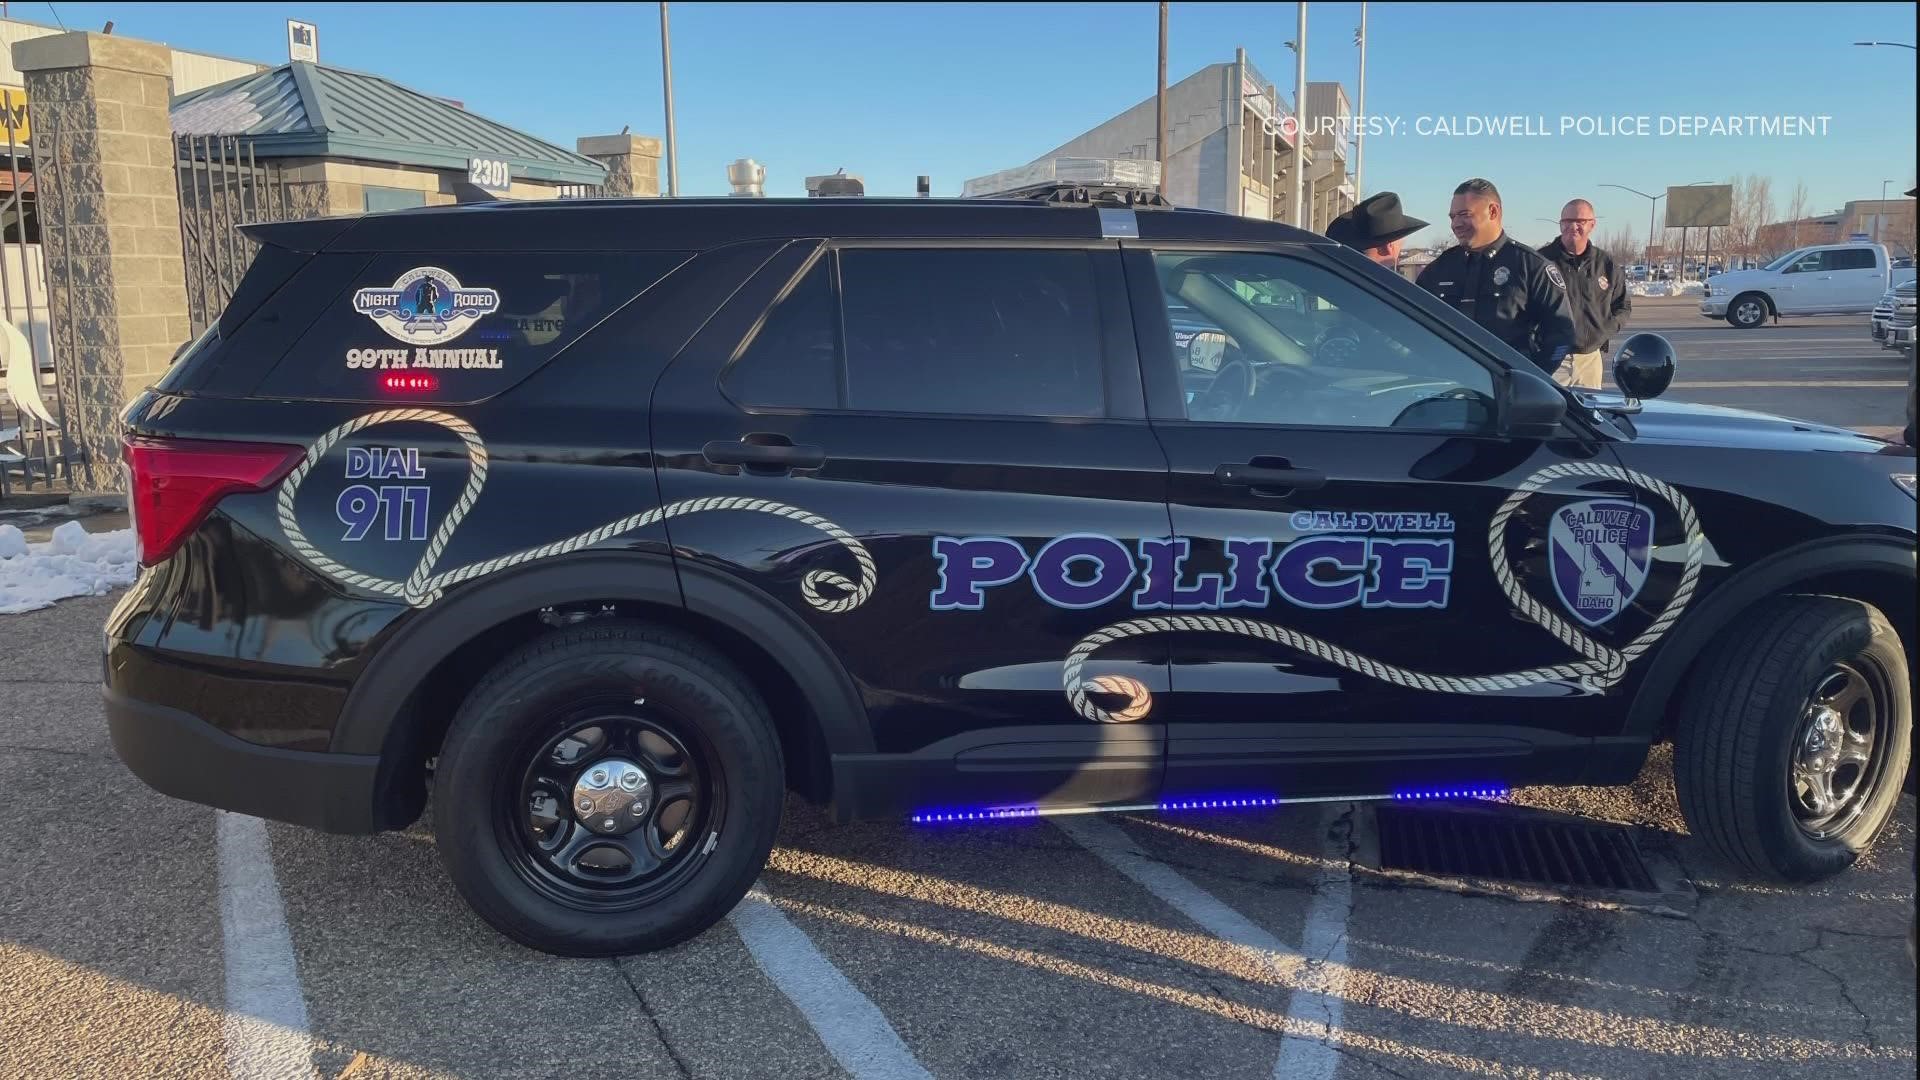 Caldwell Police roll out rodeothemed patrol car